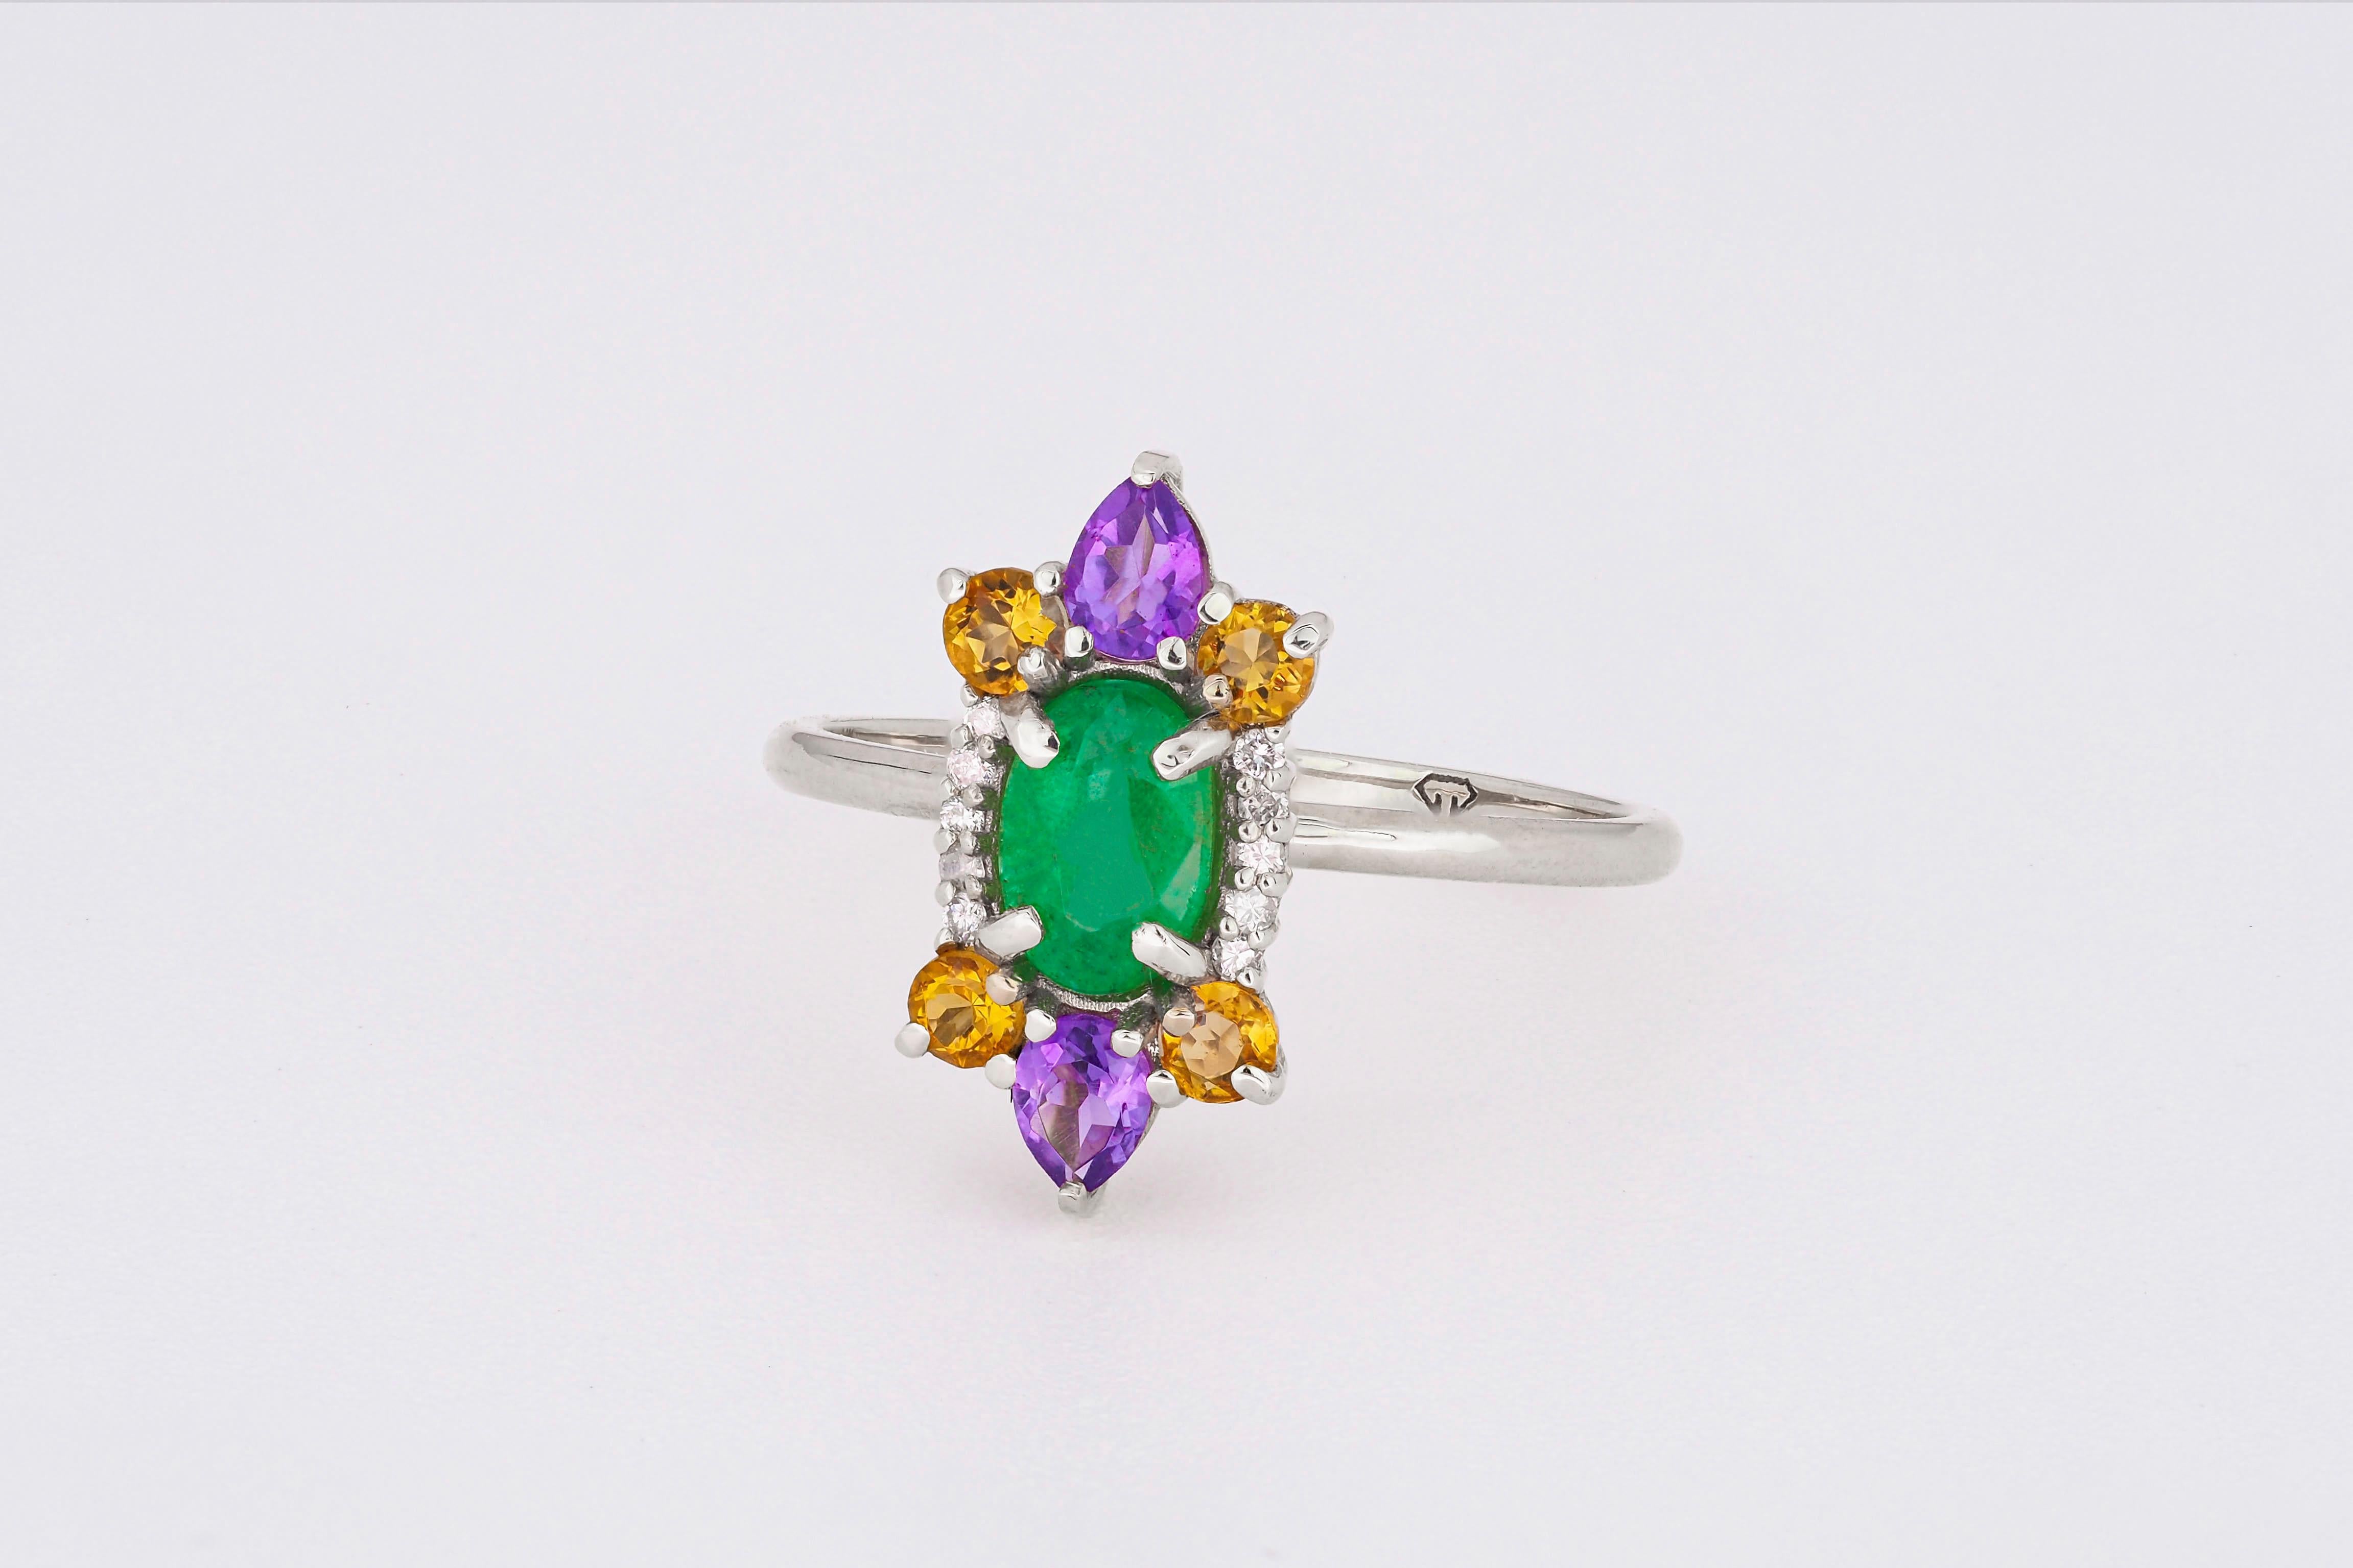 Emerald 14k gold ring. 
Oval emerald ring. Emerald vintage ring. Multi Color Natural Gemstone Ring. May birthstone. Emerald statement ring.

Metal: 14k gold
Weight: 2.5 g. depends from size.

Central stone: Emerald
Cut: Oval
Weight: 0.8 ct.
Color: